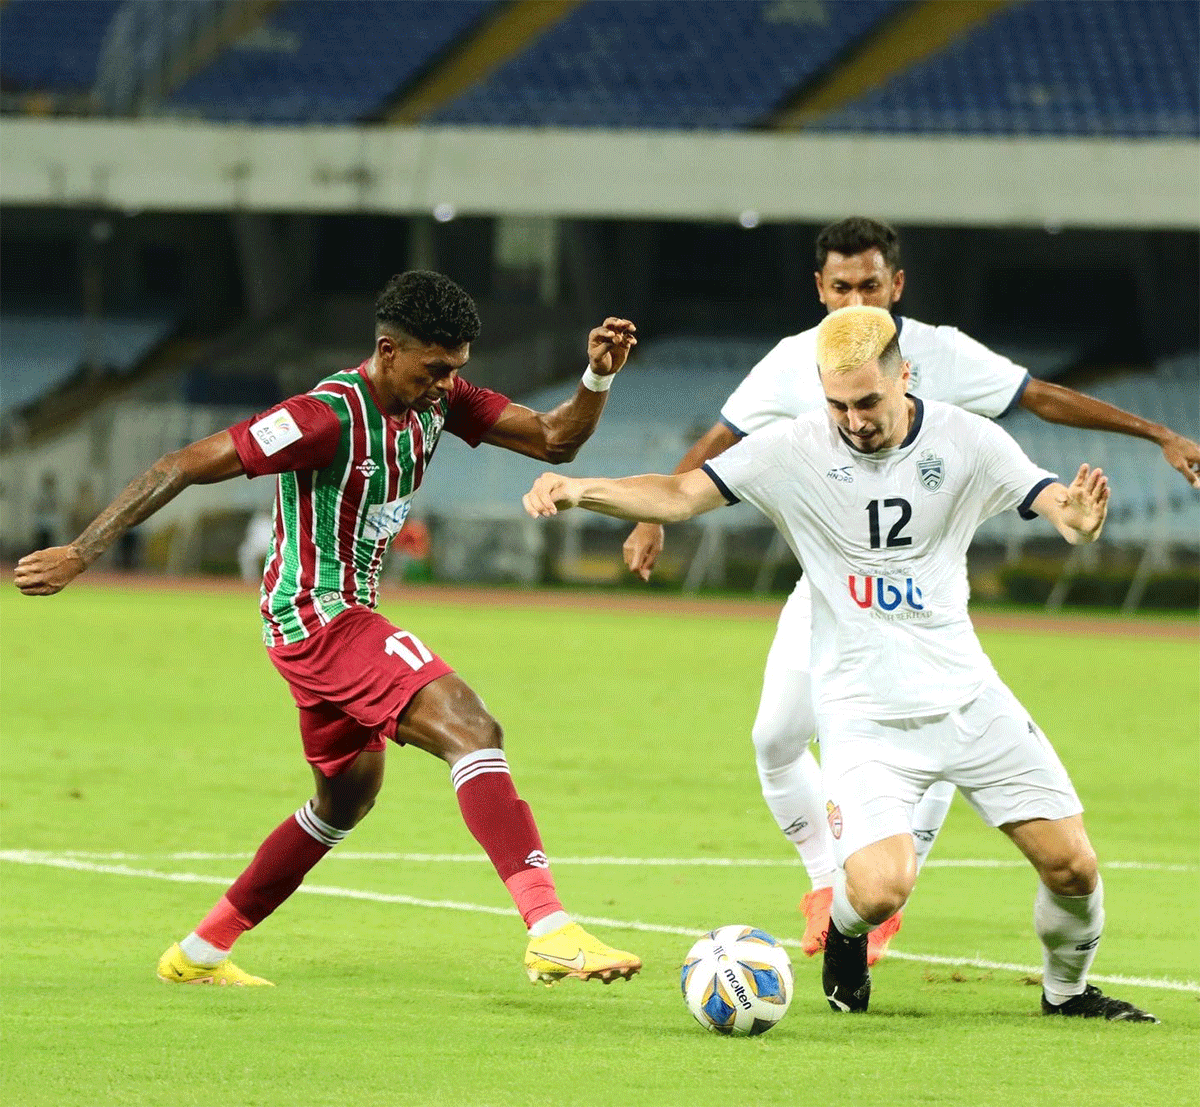 Action from the AFC Cup match played between ATK Mohun Bagan and KL City FC on Wednesday